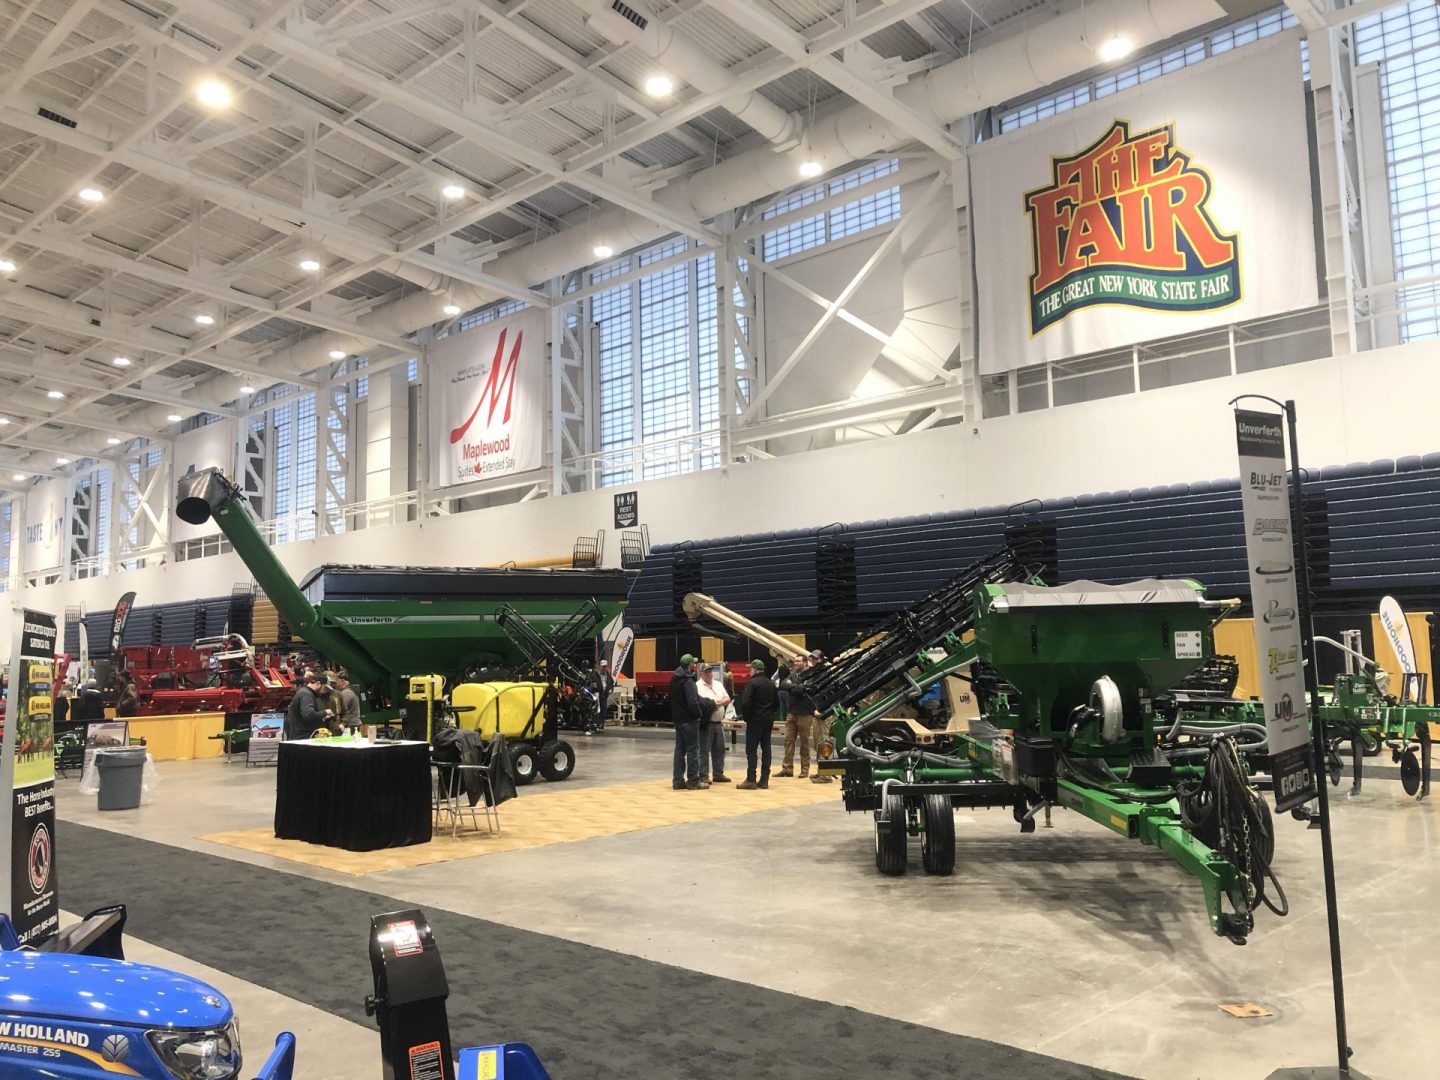 » The 2020 New York Farm Show Enters Its 35th Year